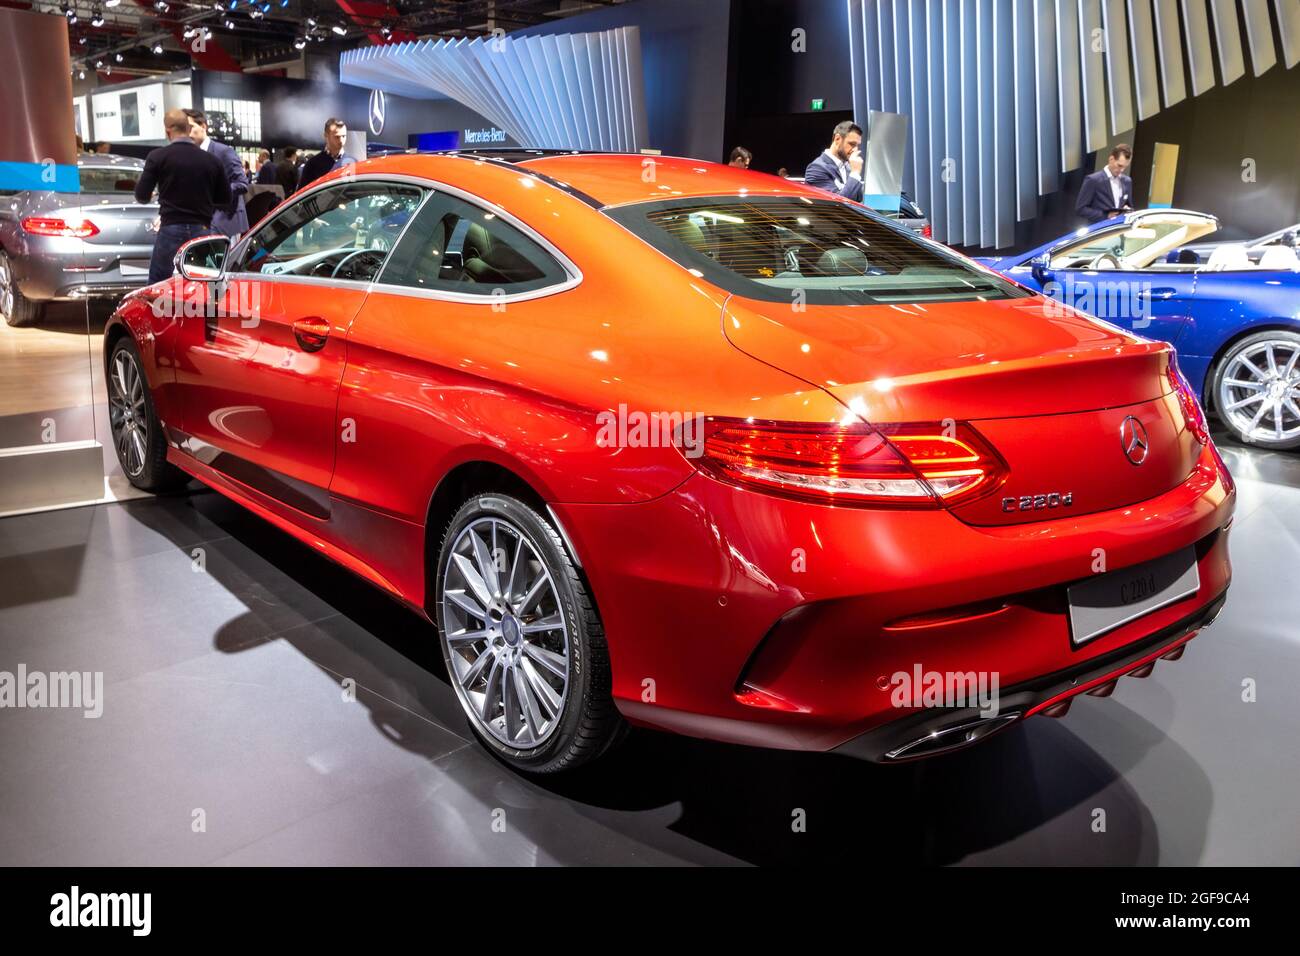 Mercedes Benz C 220 D car showcased at the Brussels Expo Autosalon motor show. Belgium - January 12, 2016 Stock Photo